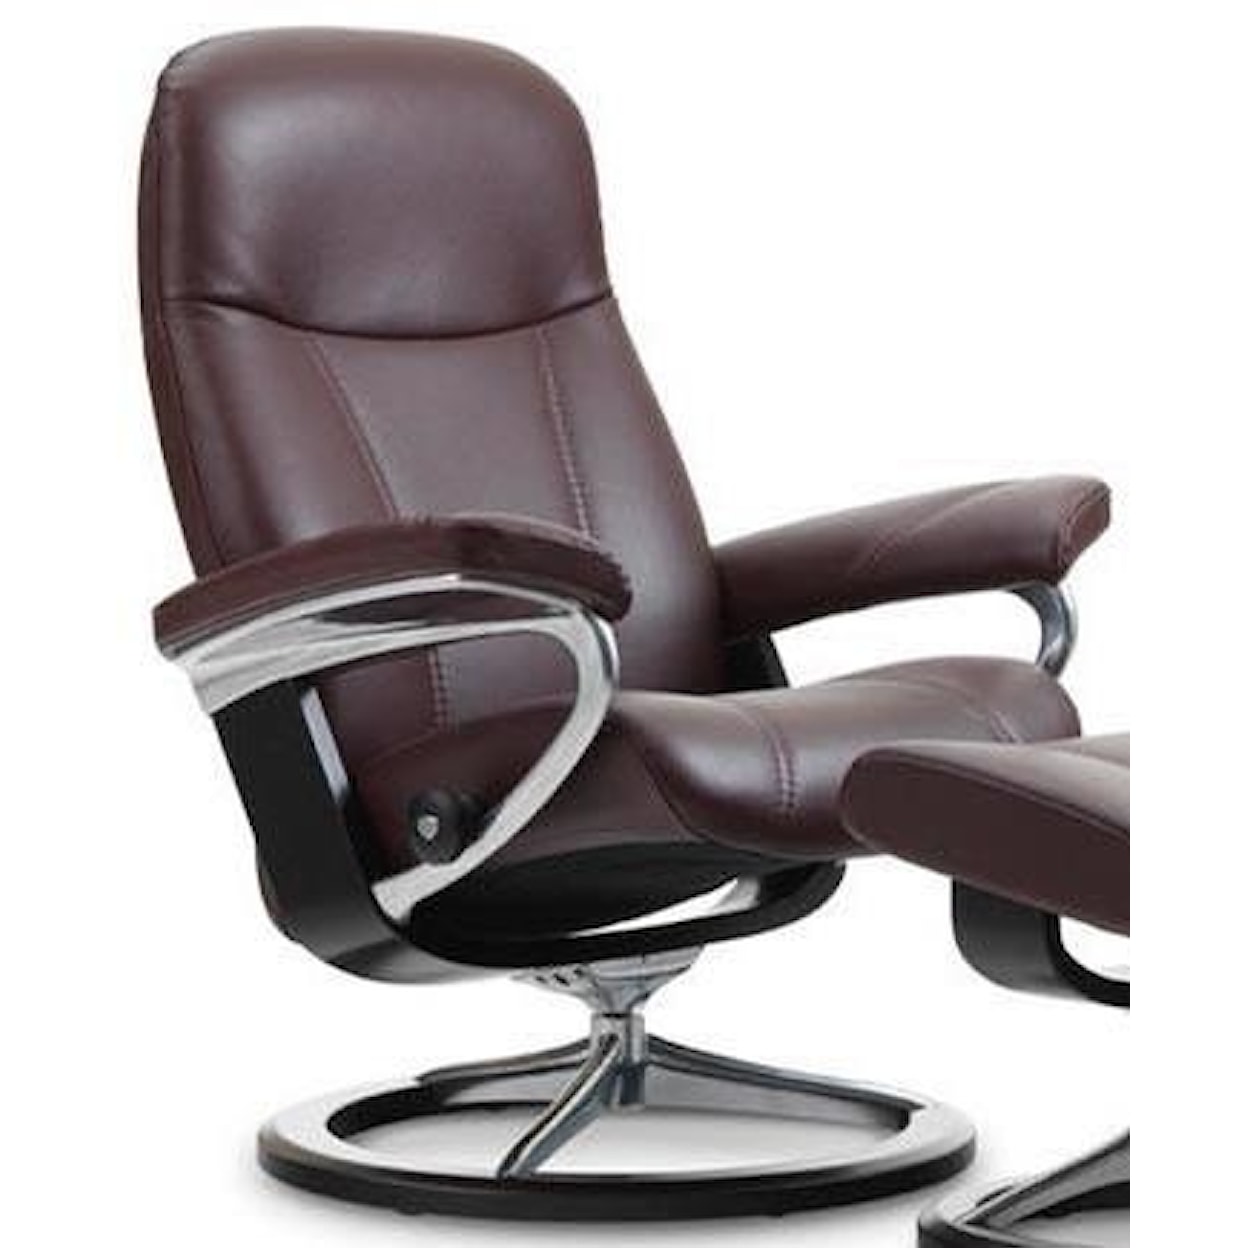 Stressless by Ekornes Consul Large Reclining Chair with Signature Base